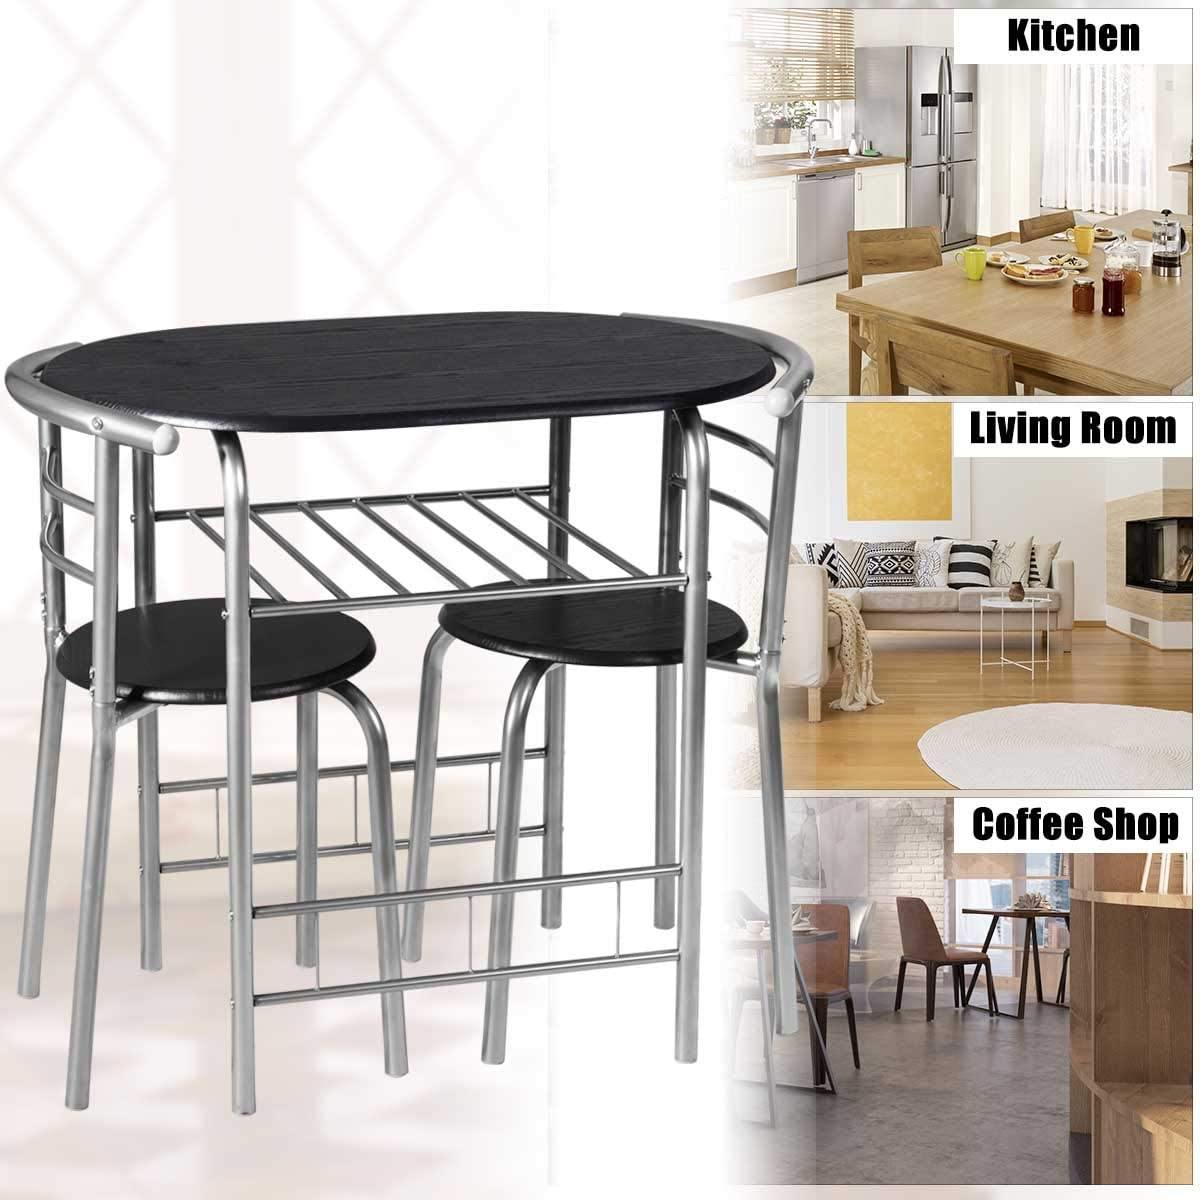 3 Piece Dining Set Compact 2 Chairs and Table - Giantexus